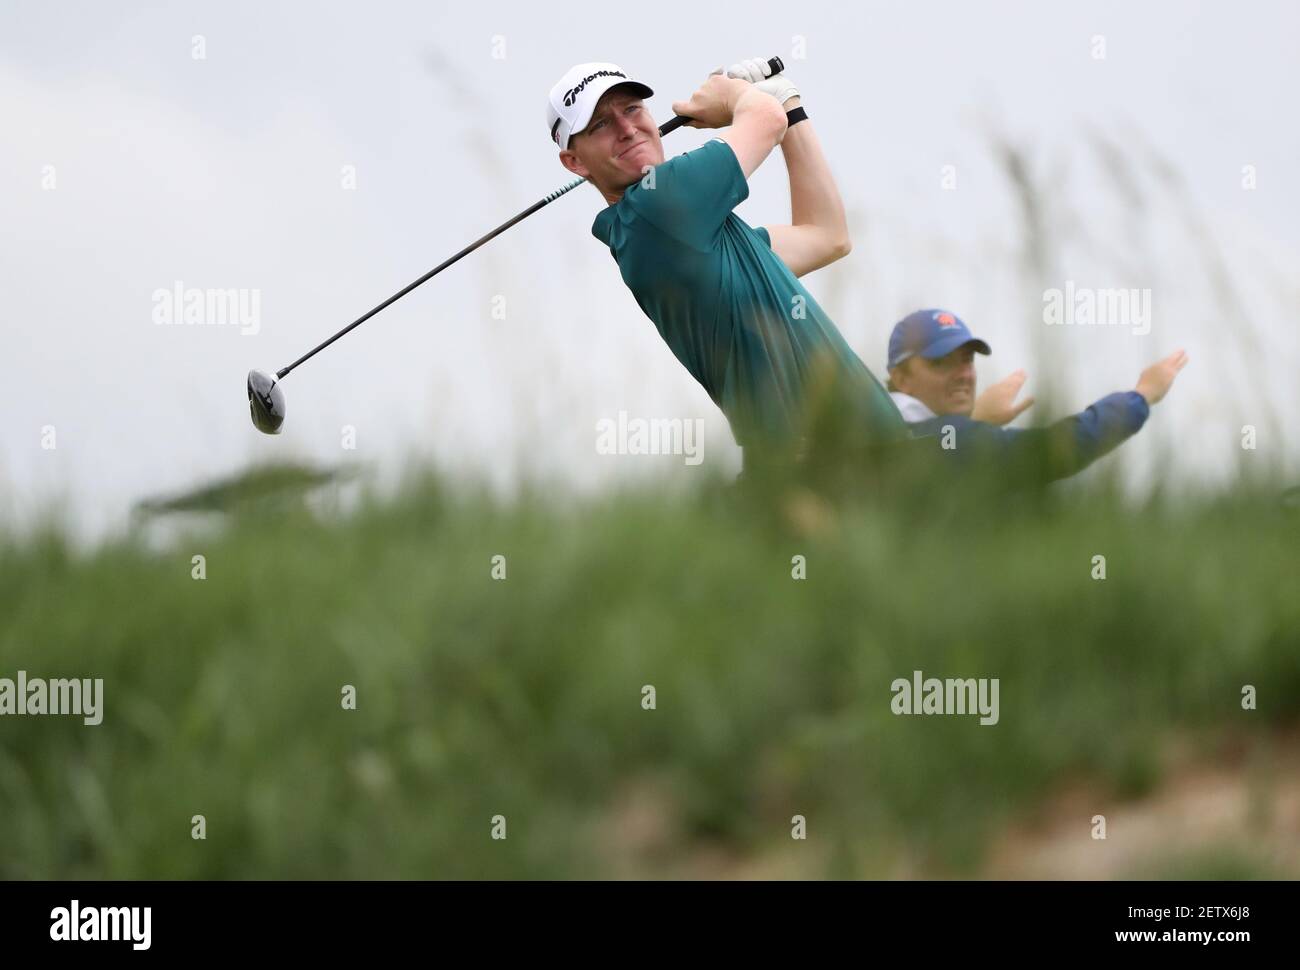 Jun 13, 2017; Erin, WI, USA; Jordan Niebrugge plays his shot from the 12th tee during a practice round of the U.S. Open golf tournament at Erin Hills. Mandatory Credit: Geoff Burke-USA TODAY Sports *** Please Use Credit from Credit Field *** Stock Photo